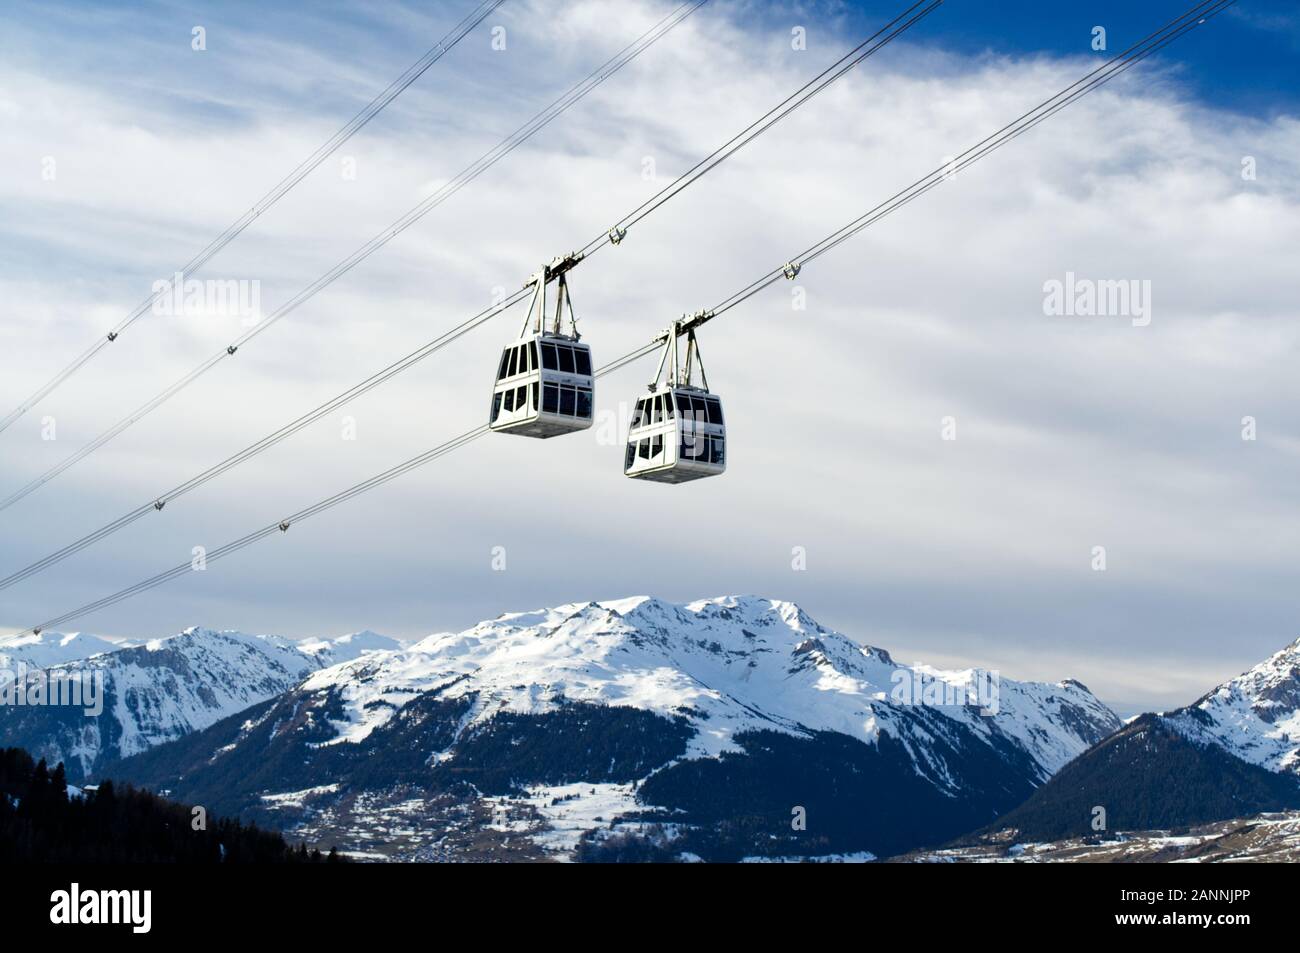 The double deck cable cars of the Vanoise Express passing on the crossing between Les Arcs and La Plagne. Stock Photo